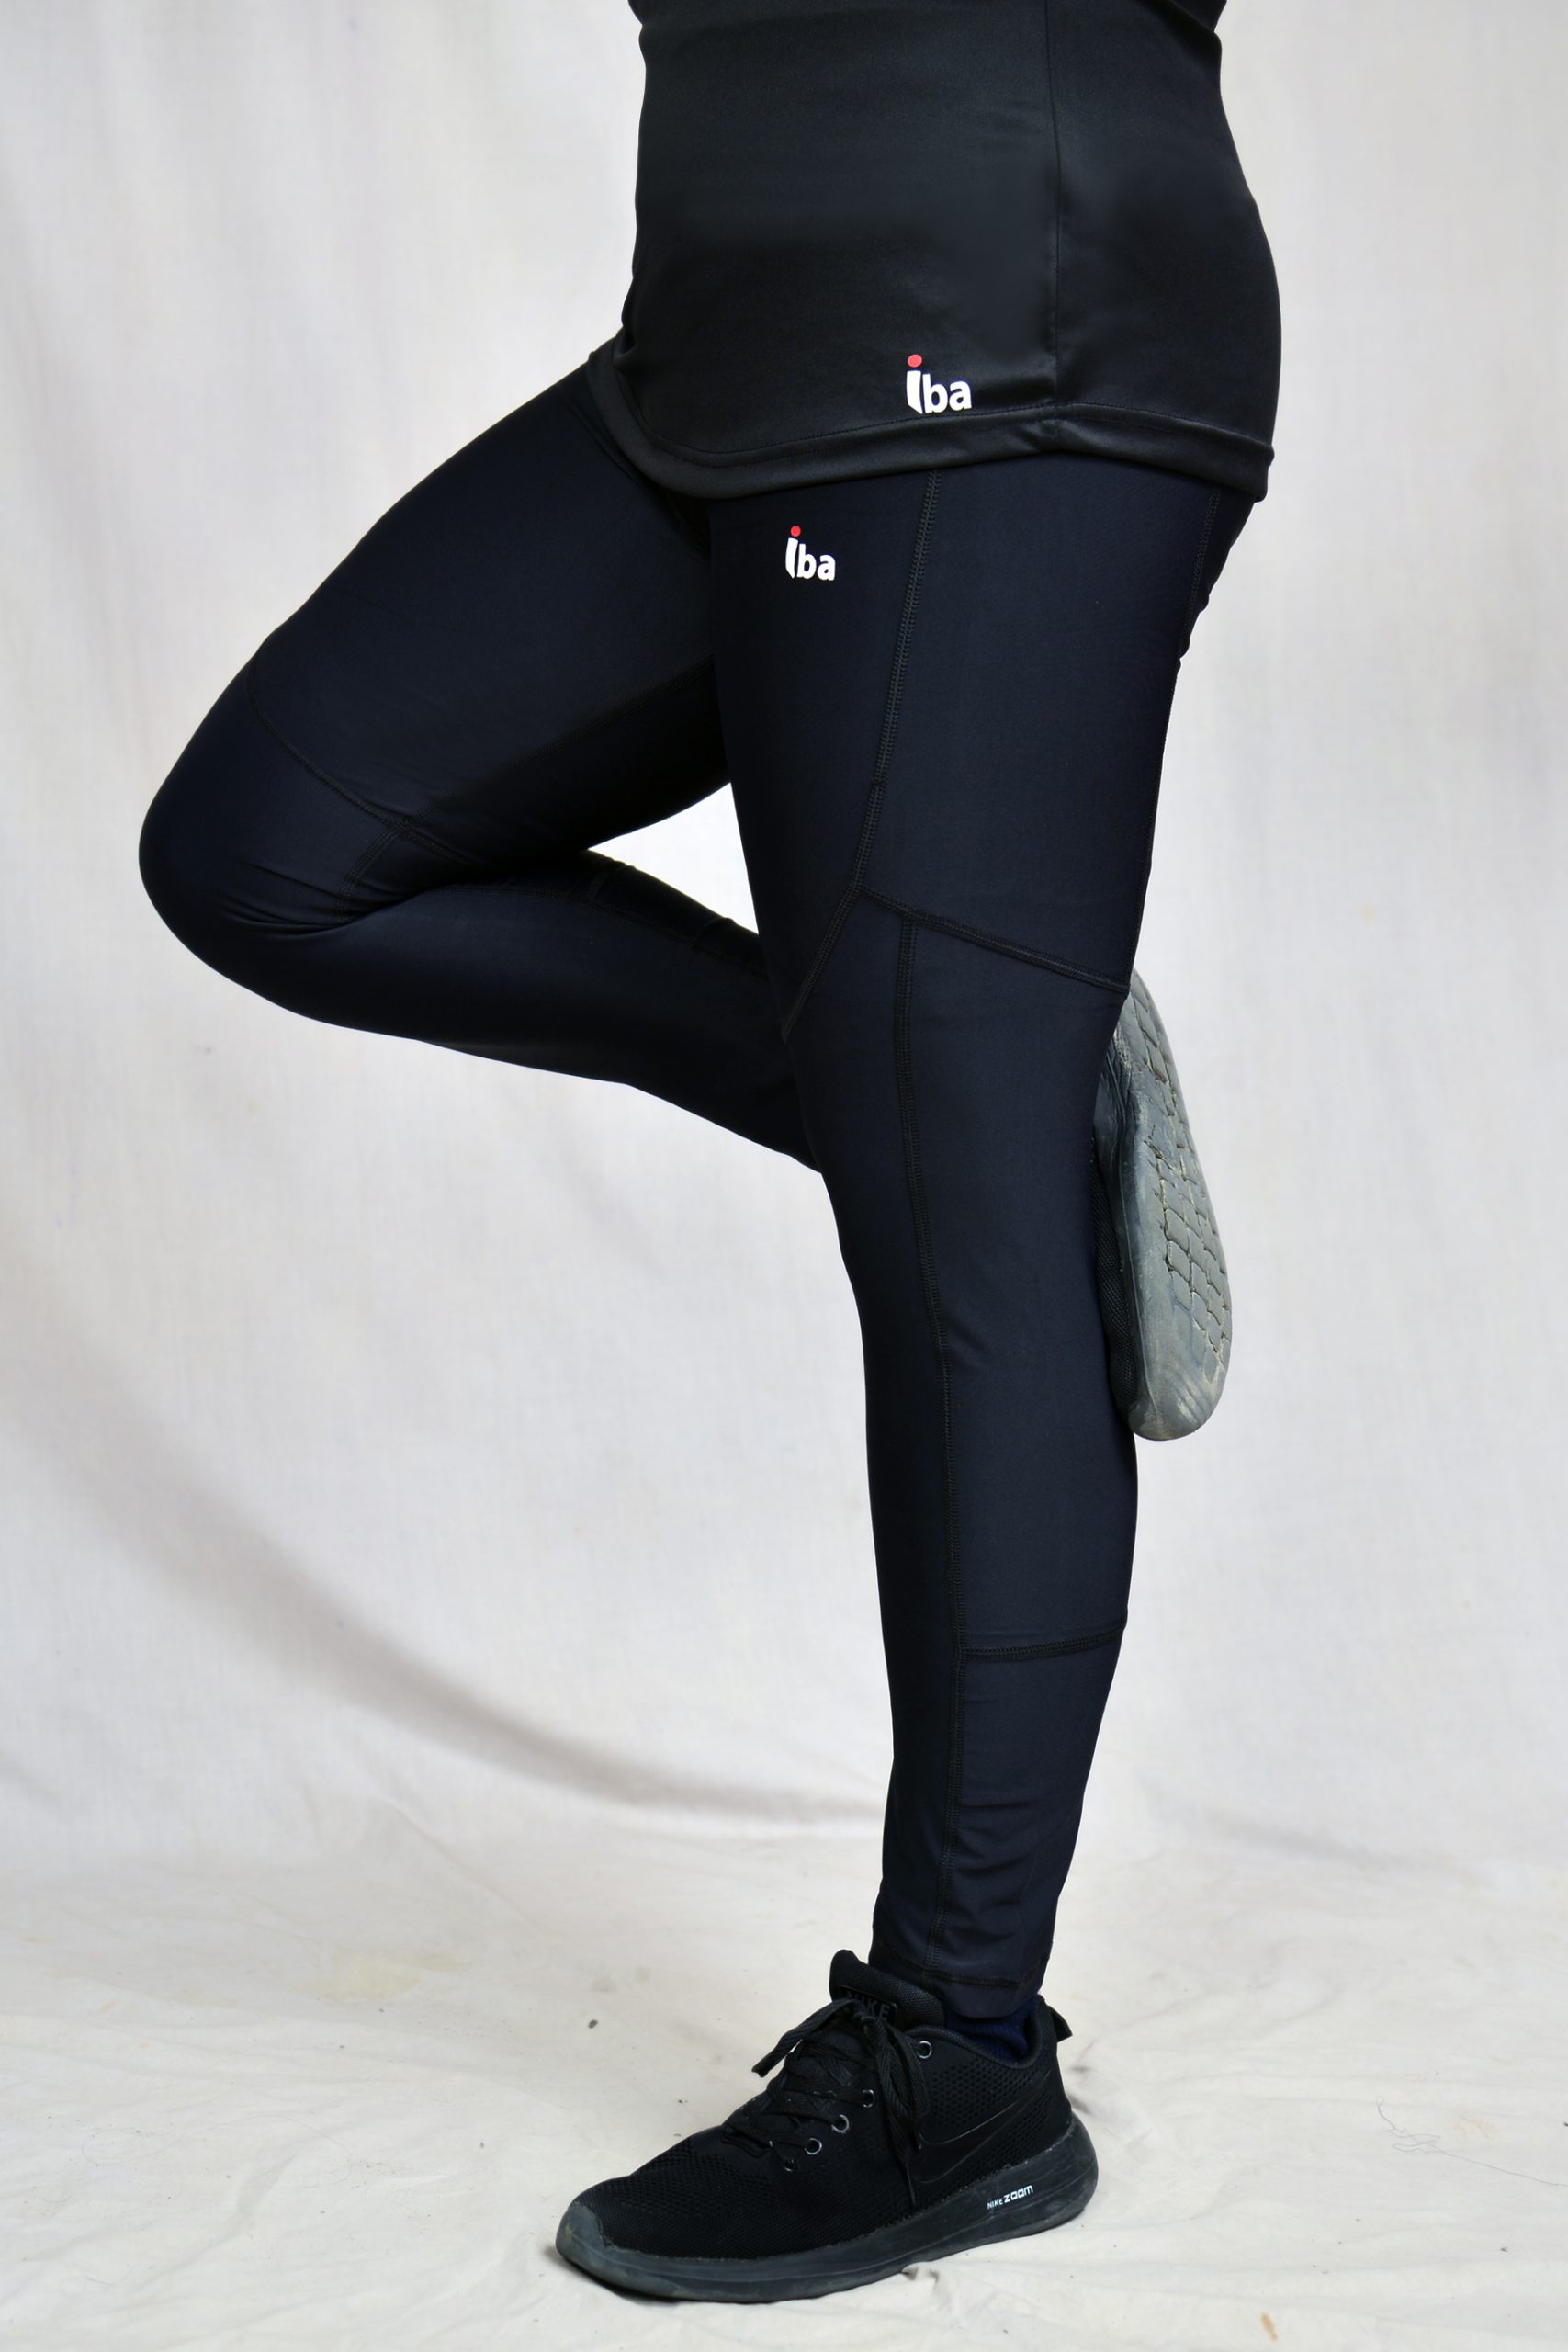 Women's workout bottom tights - IBA Exports